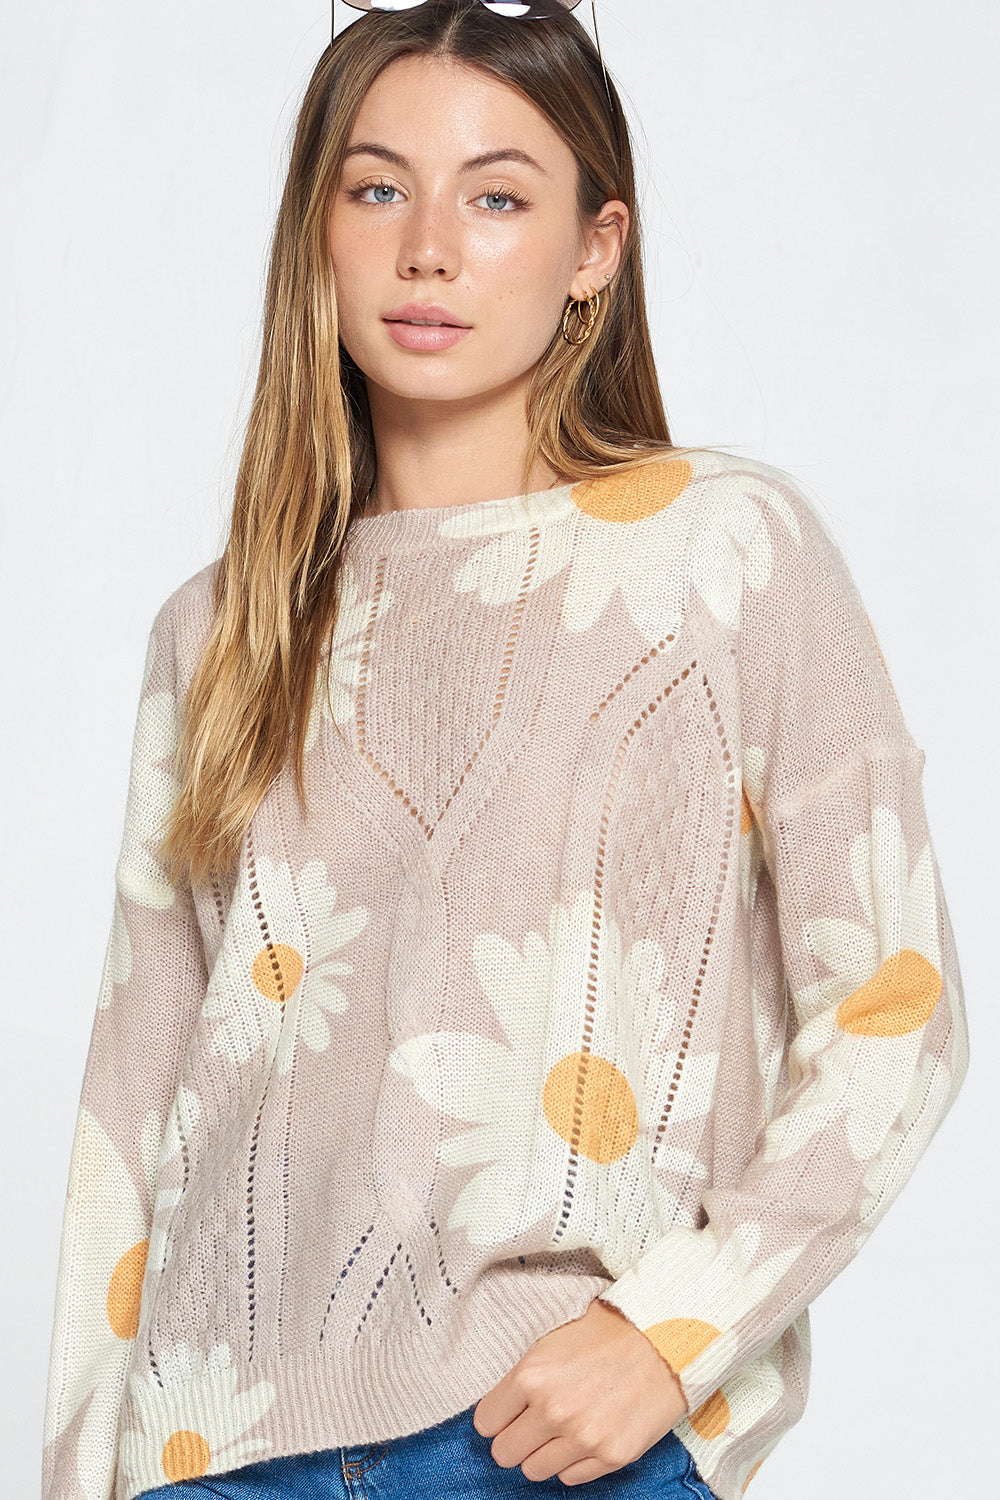 Floral Printed Crew Neck Loose Knit Sweater - Wild Luxe Boutique